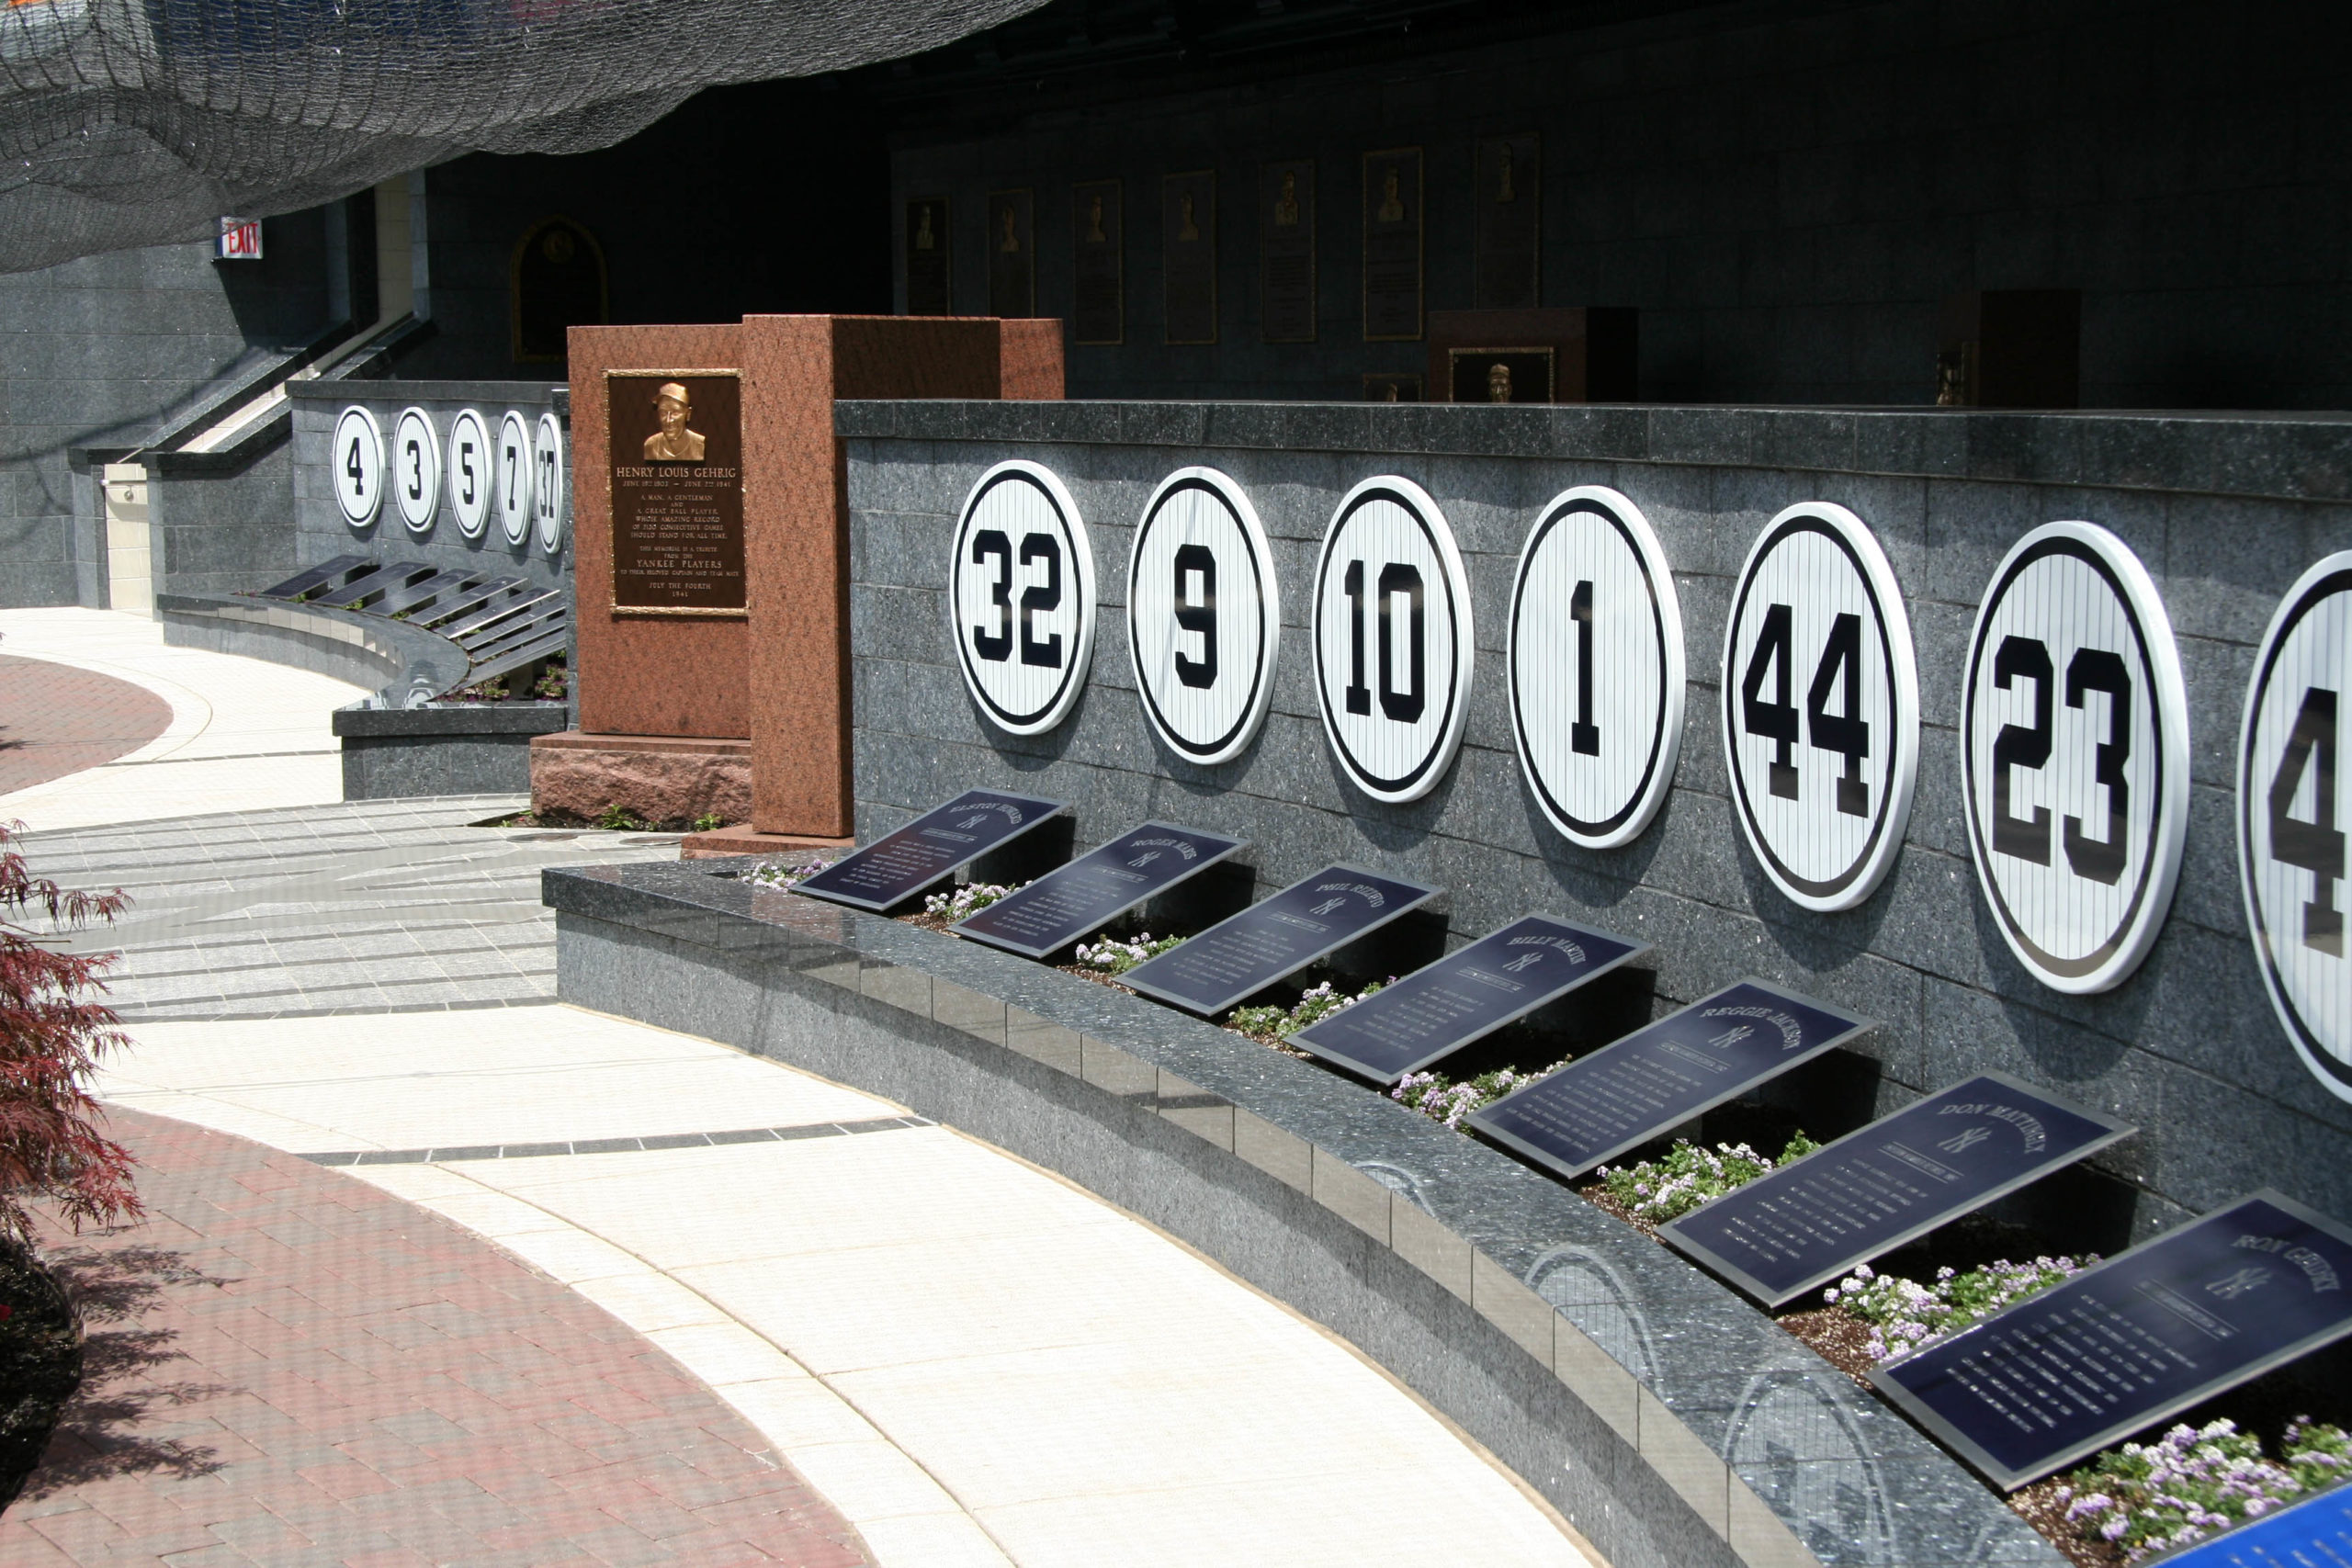 Have the Yankees retired too many numbers?